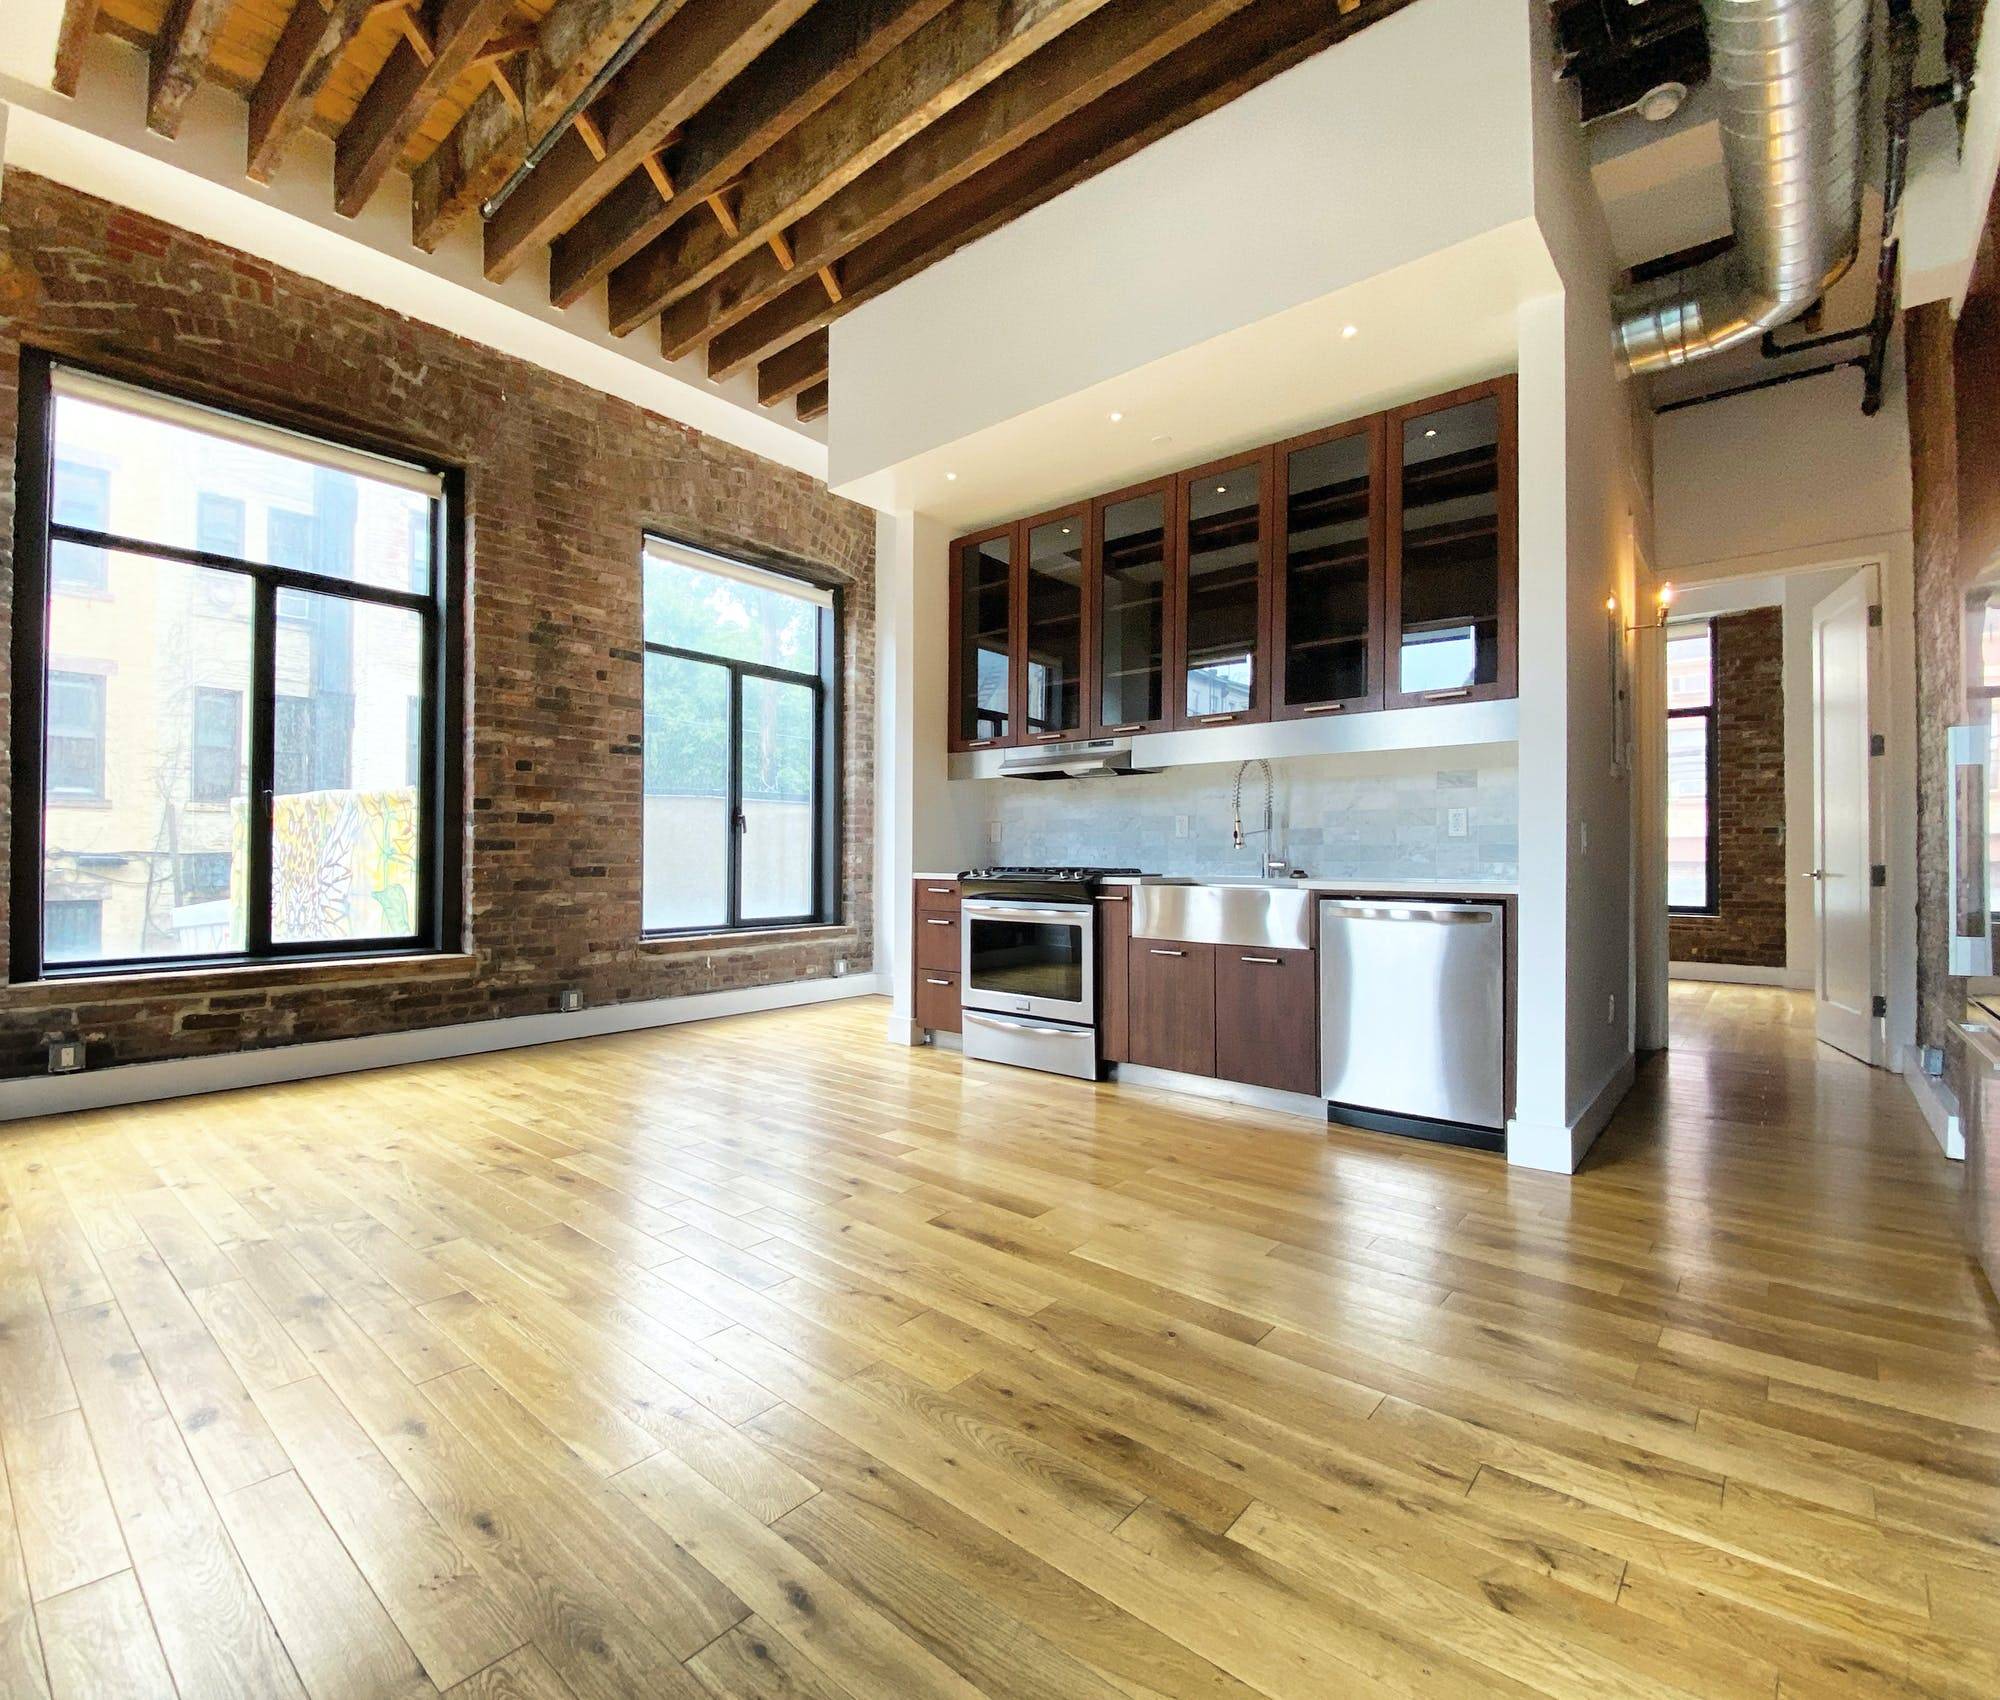 1 Bed 1 Bath Home open OPEN HOUSES ARE BY APPOINTMENT ONLY Welcome to the Printhouse Lofts !